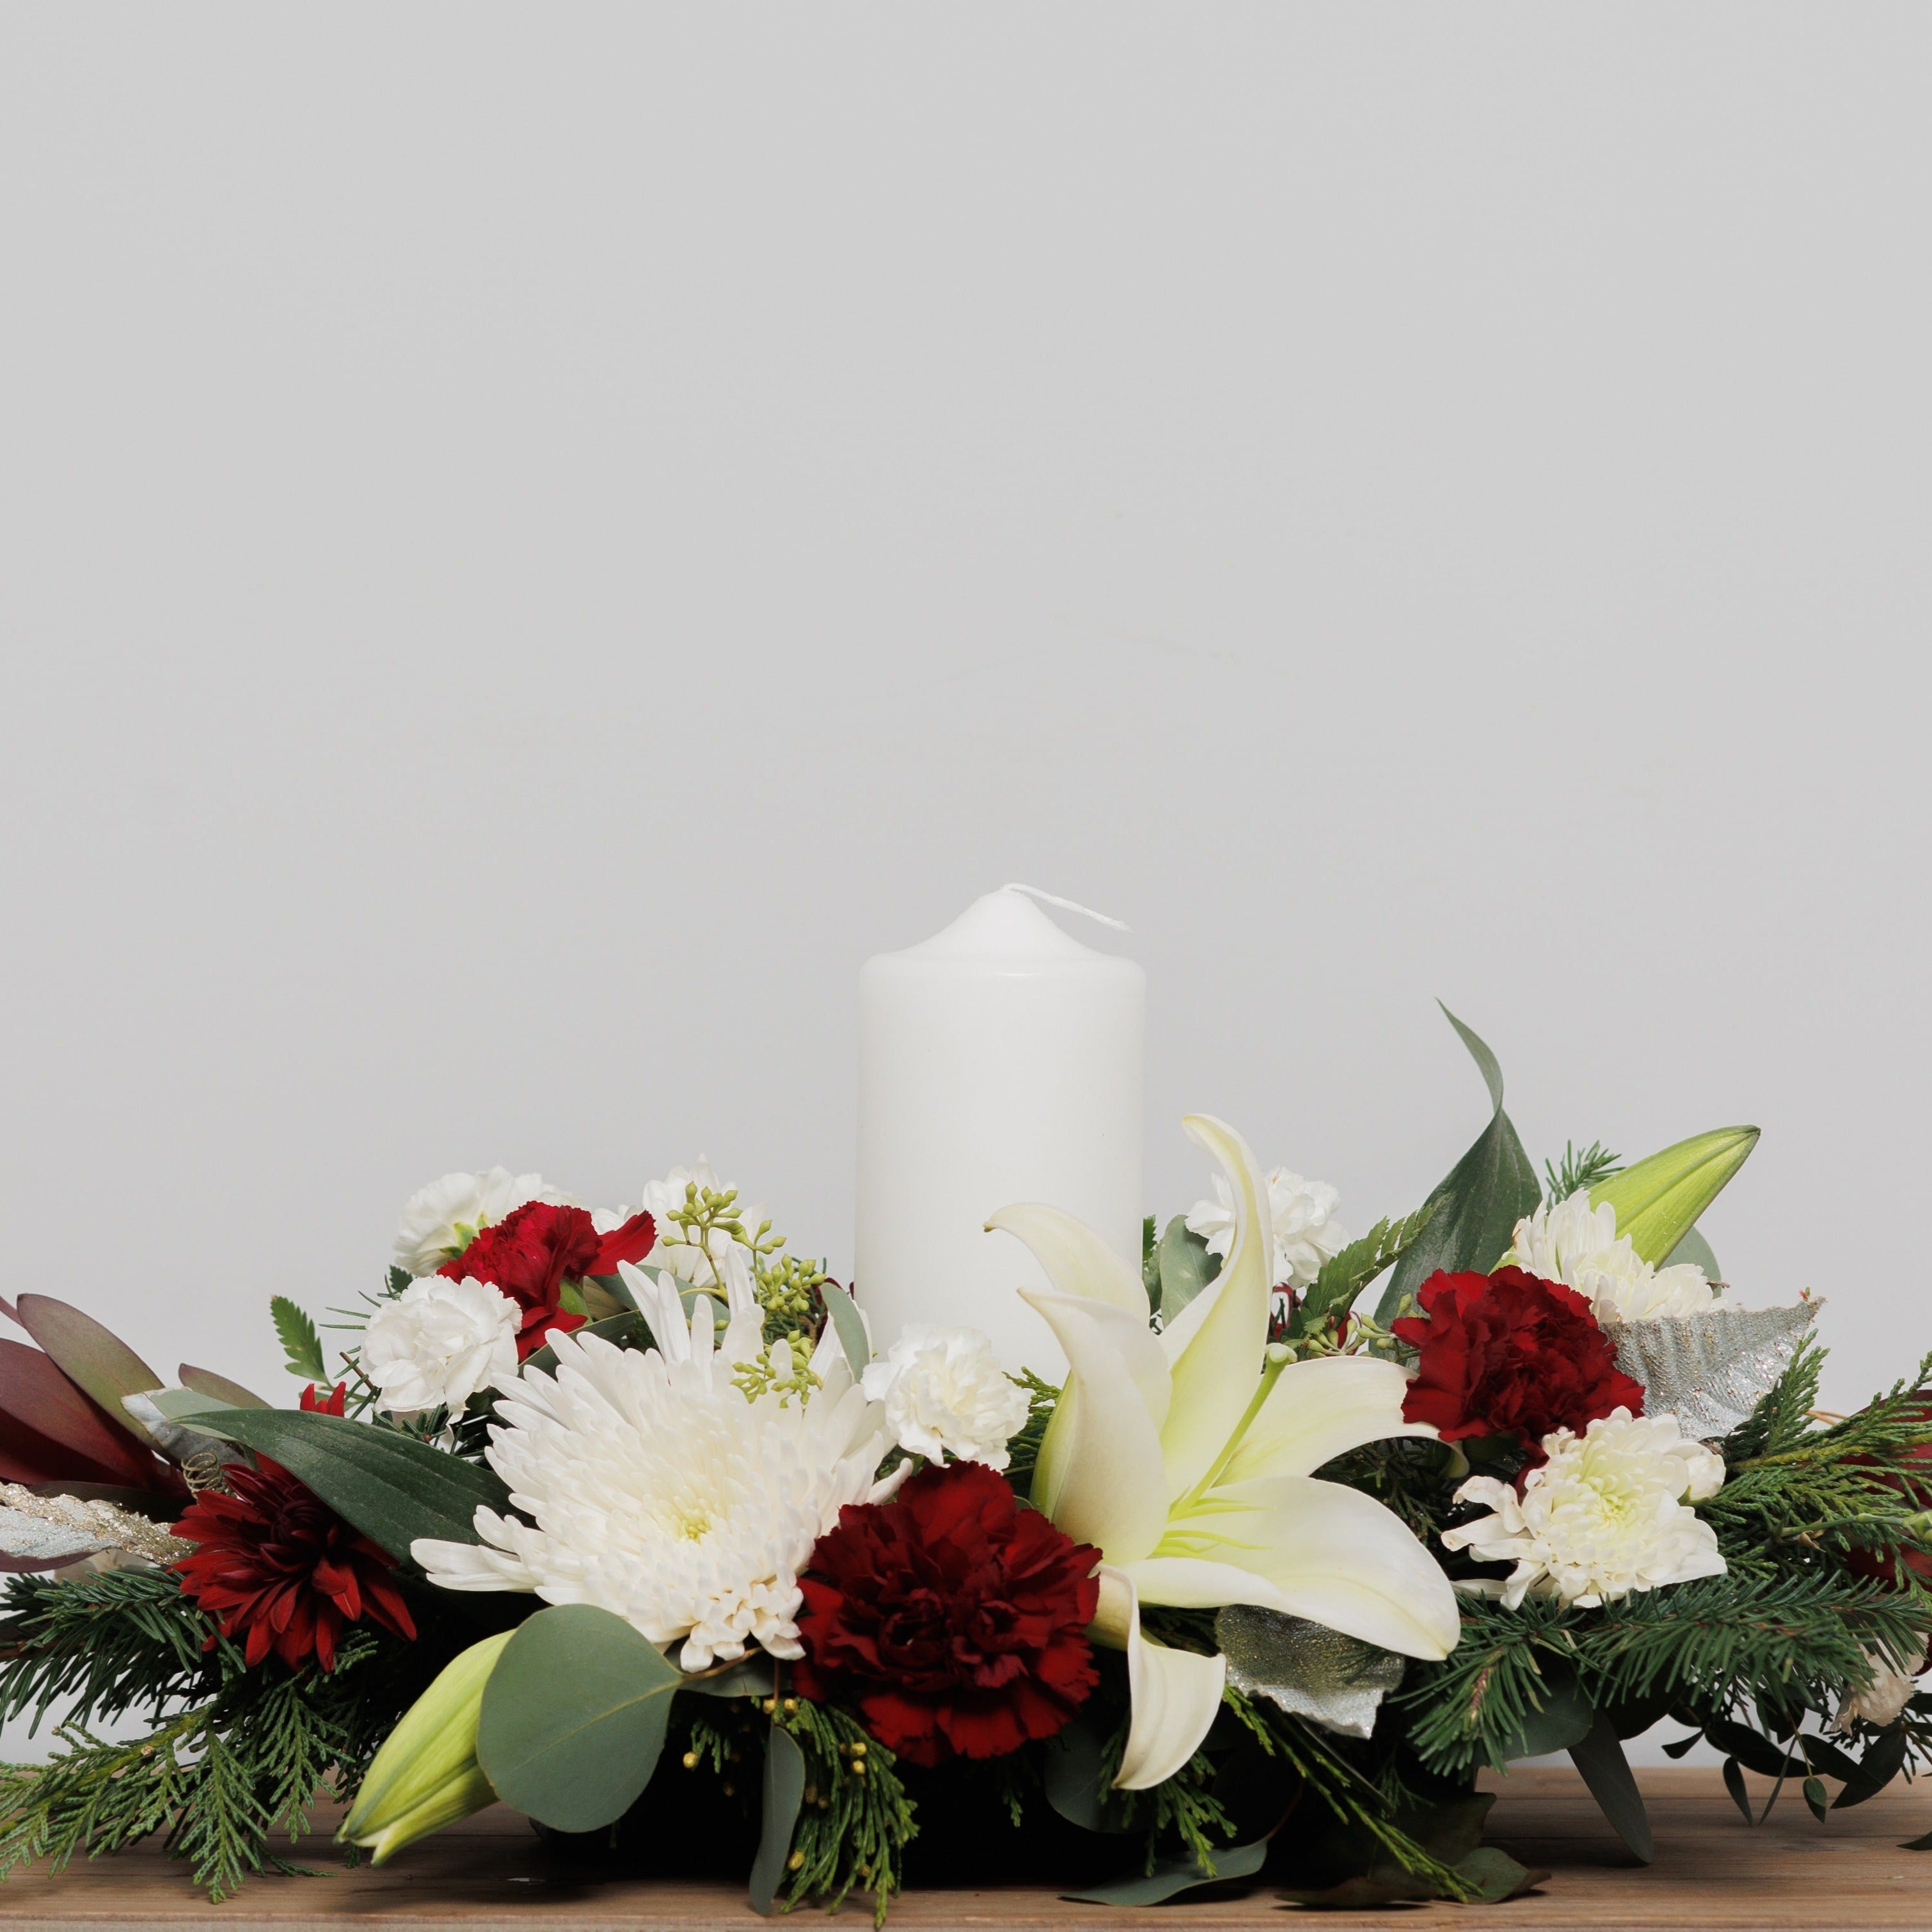 A burgundy and white Christmas centerpiece with a single pillar candle.